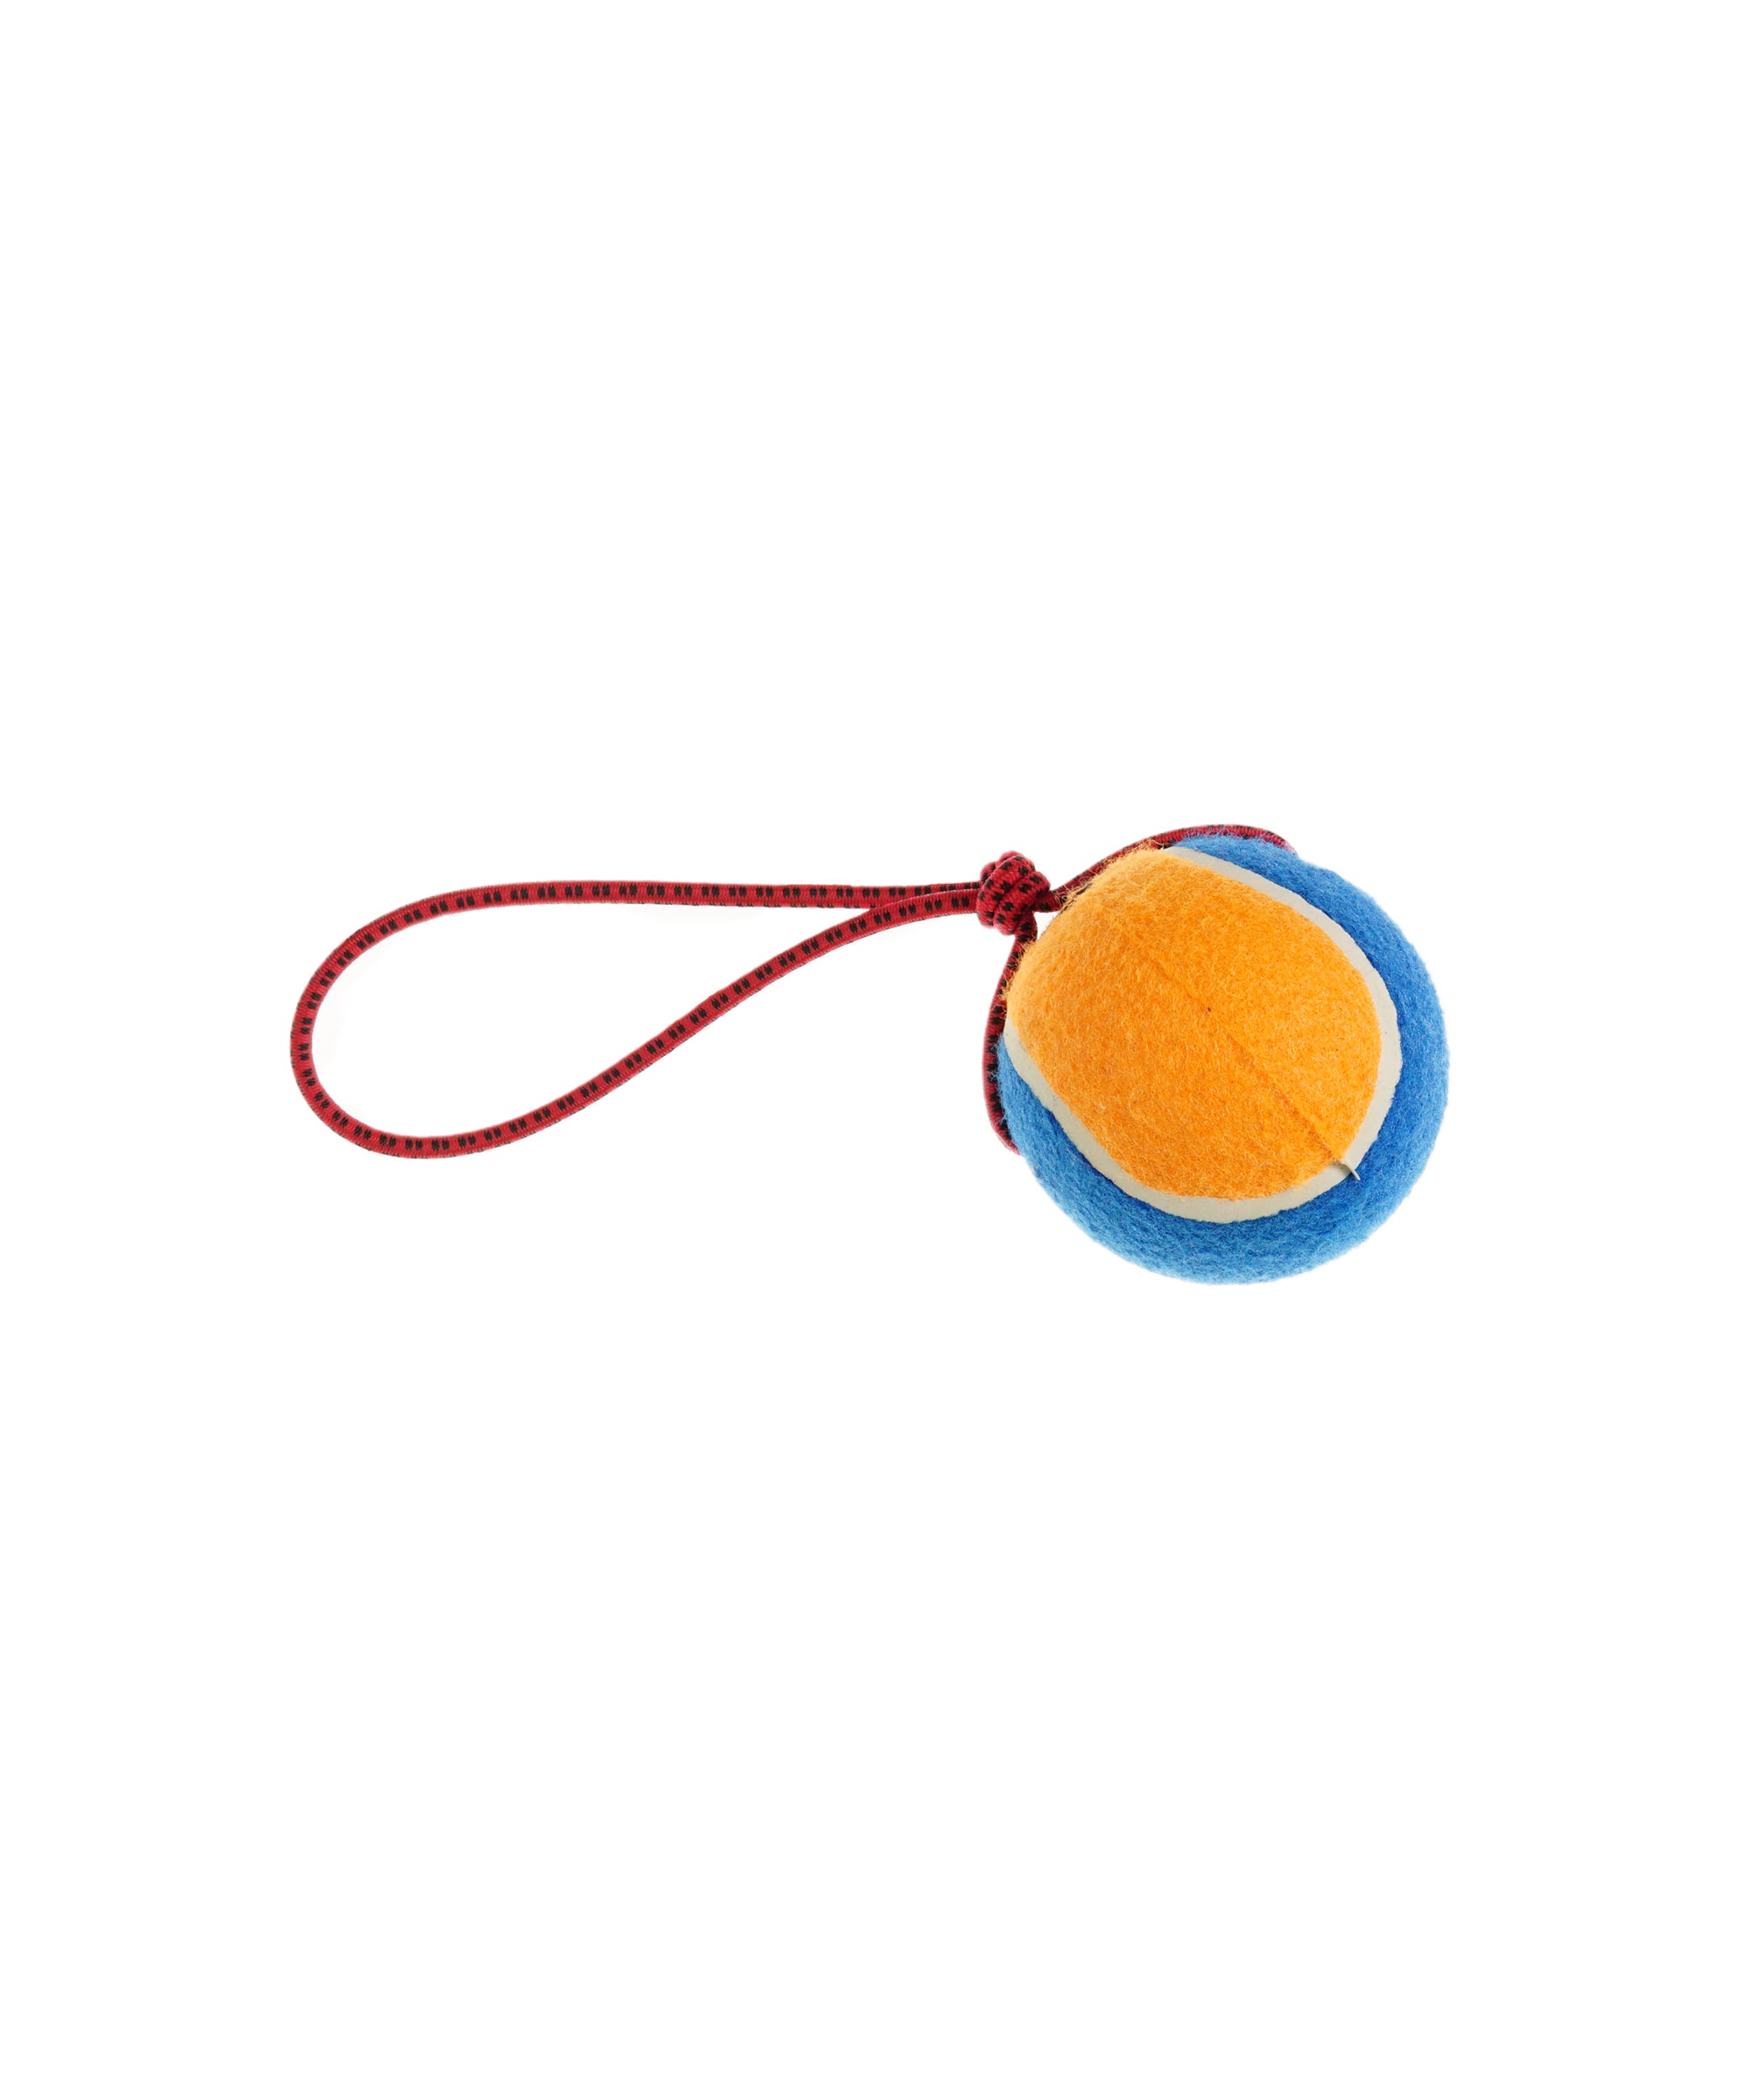 knotted rope dog toy with large tennis ball 4" diameter